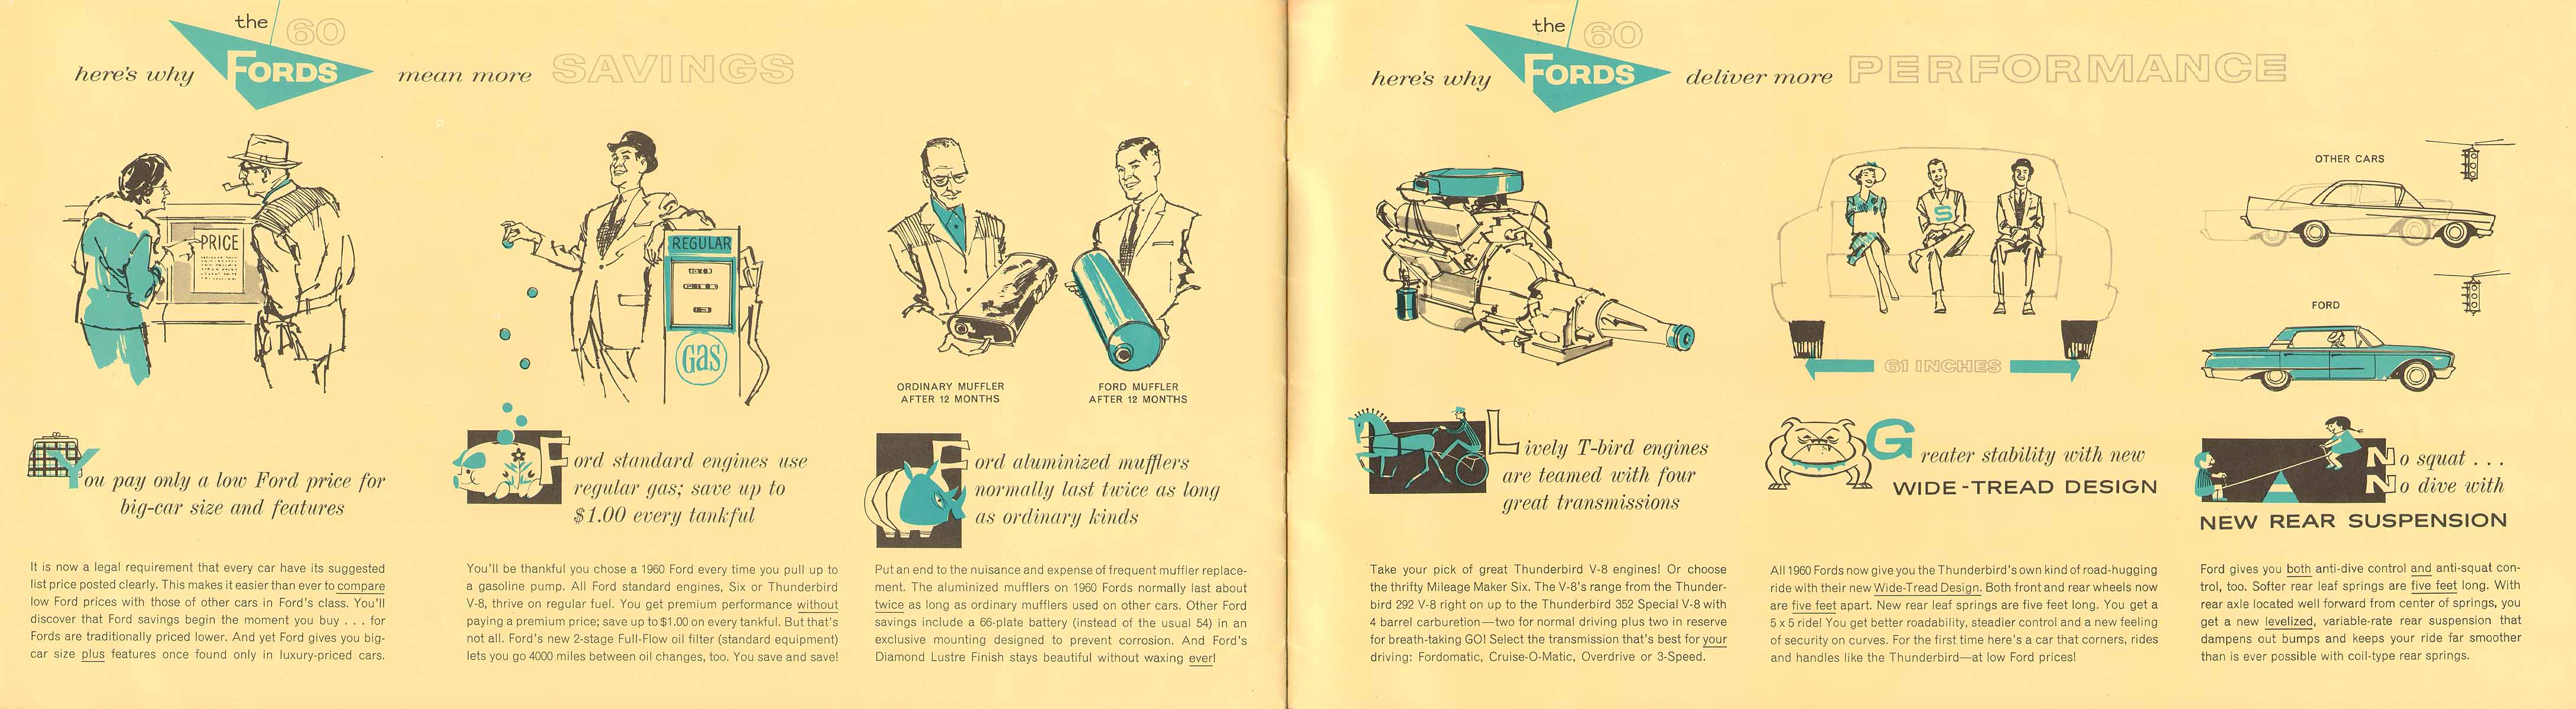 1960_Ford-20-21